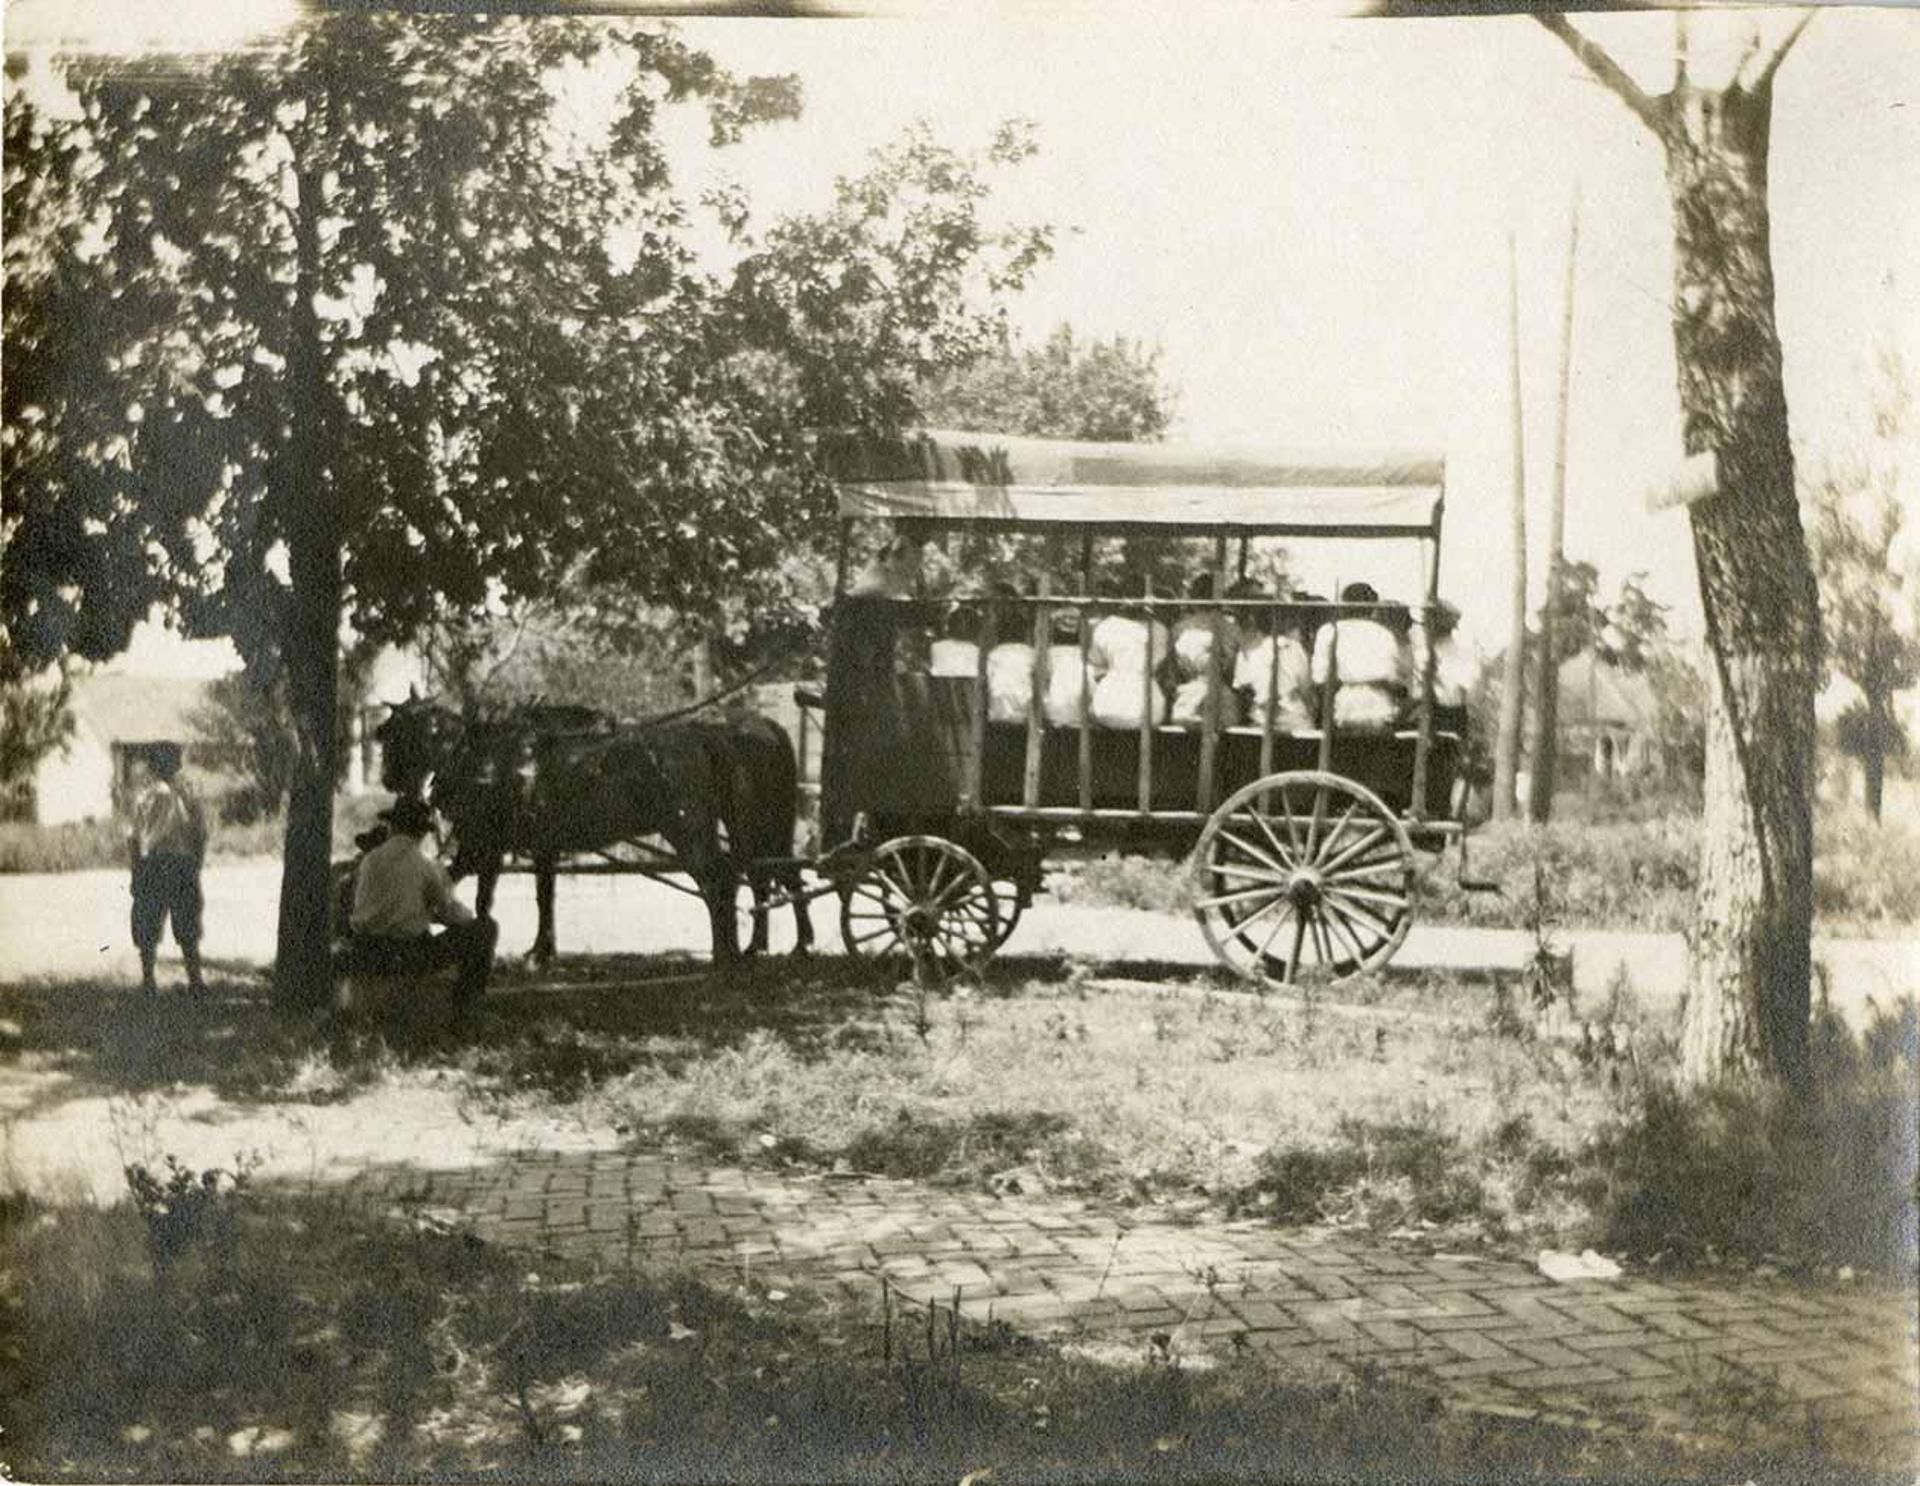 Antique photo of people packed in a traveling carriage